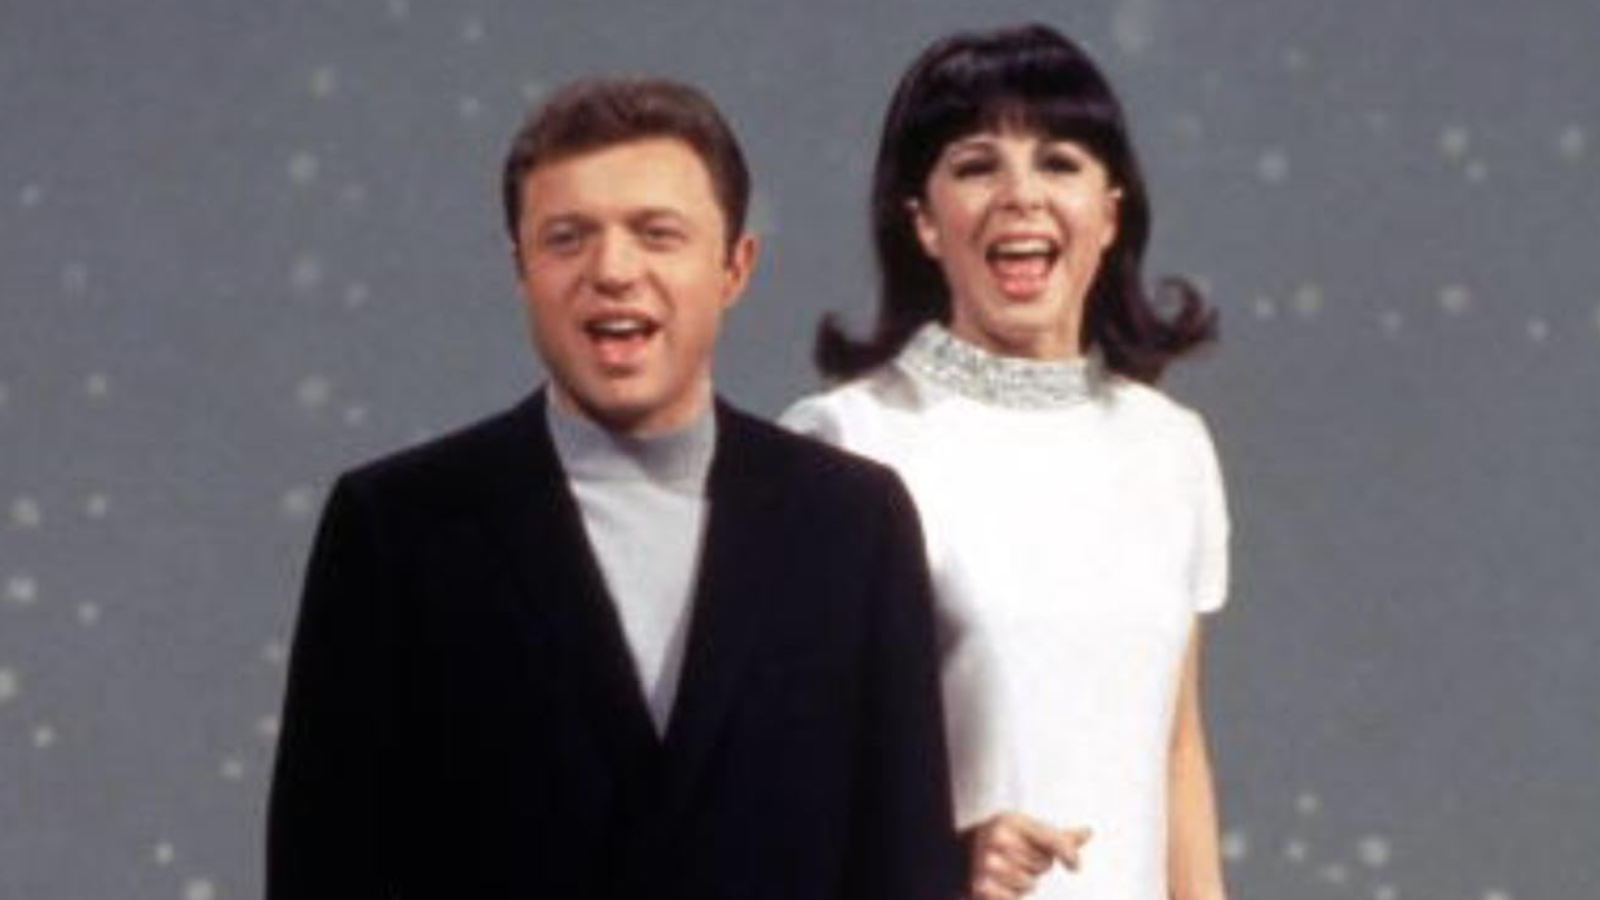 <p><span>Famed singer Steve Lawrence passed away on March 7, 2024. Steve was an iconic singer who performed on talk shows, in nightclubs, and even made the Las Vegas Circuit. Steve passed away from complications resulting from Alzheimer’s disease at the age of 88.</span></p><p><span>Steve would tour the United States with his wife, Eydie Gorme, as the stage duo Steve and Eydie. The couple composed hits such as <em>Go Away Little Girl</em>, <em>Through the Years</em>, and <em>Who Wouldn’t Love You</em>. Eydie passed away in 2013 from an undisclosed illness.</span></p>